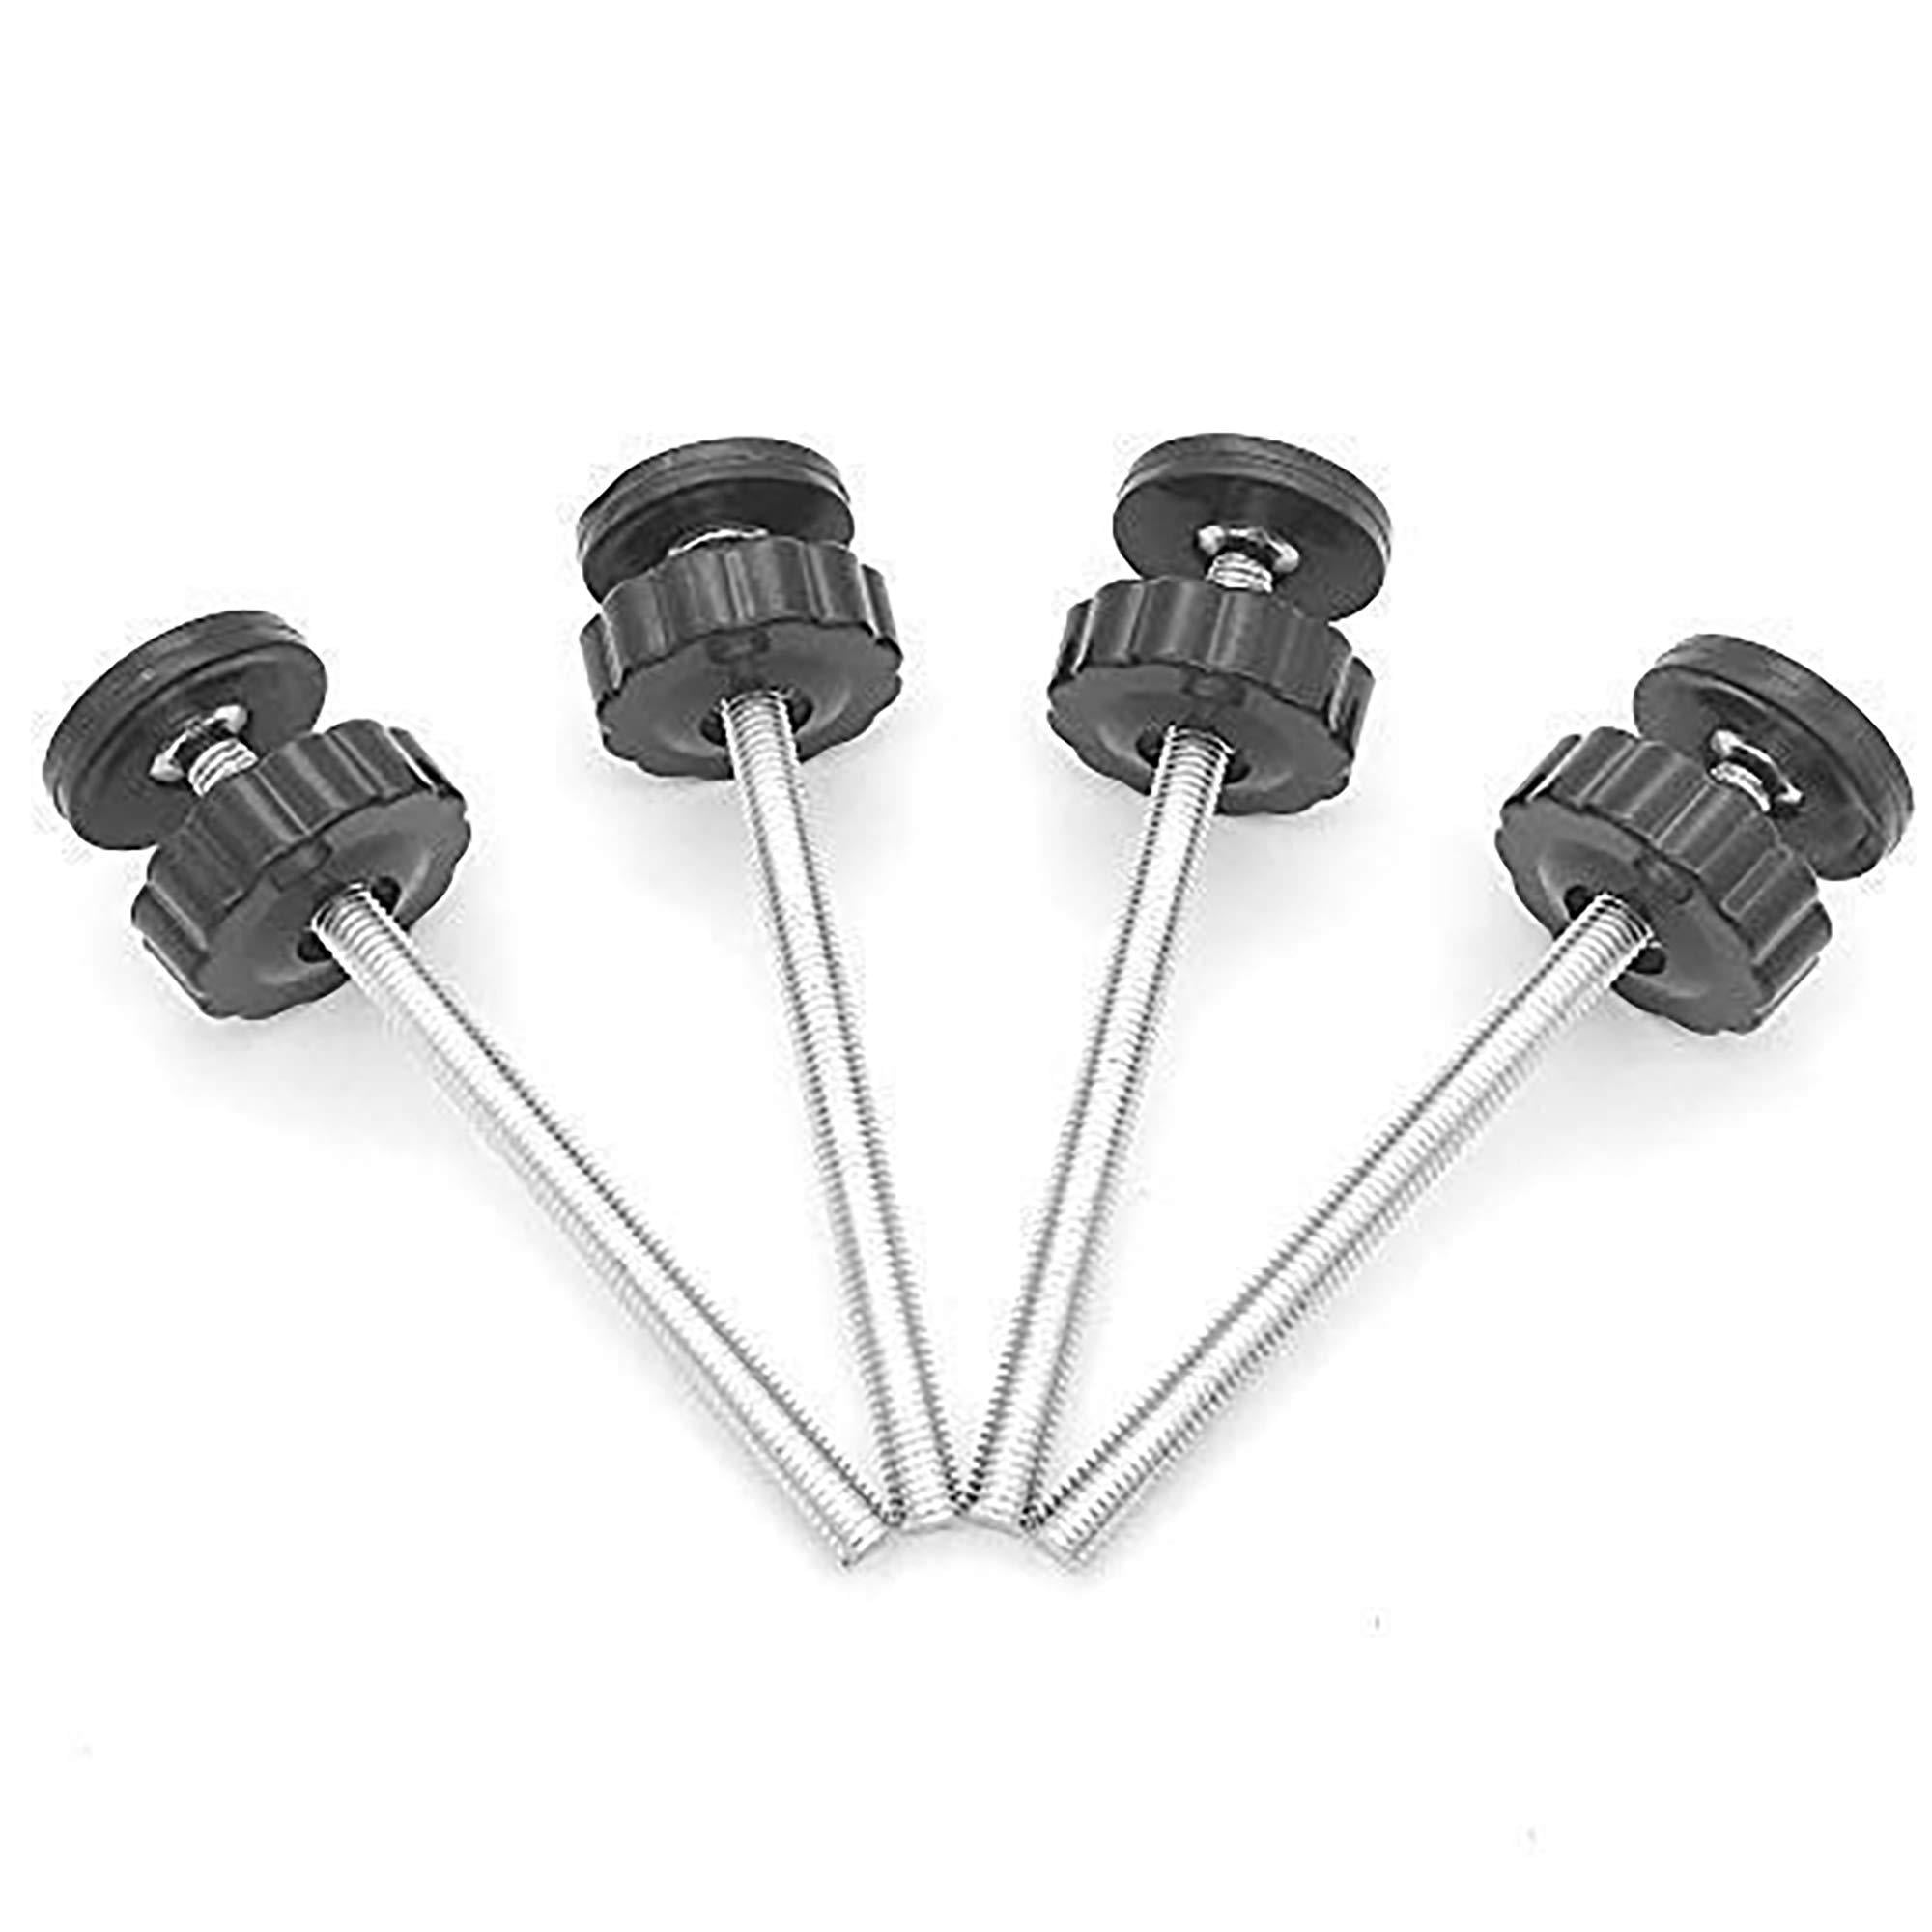 4pcs Threaded Spindle Rods Pressure Baby Gate Screw Bolts YI 